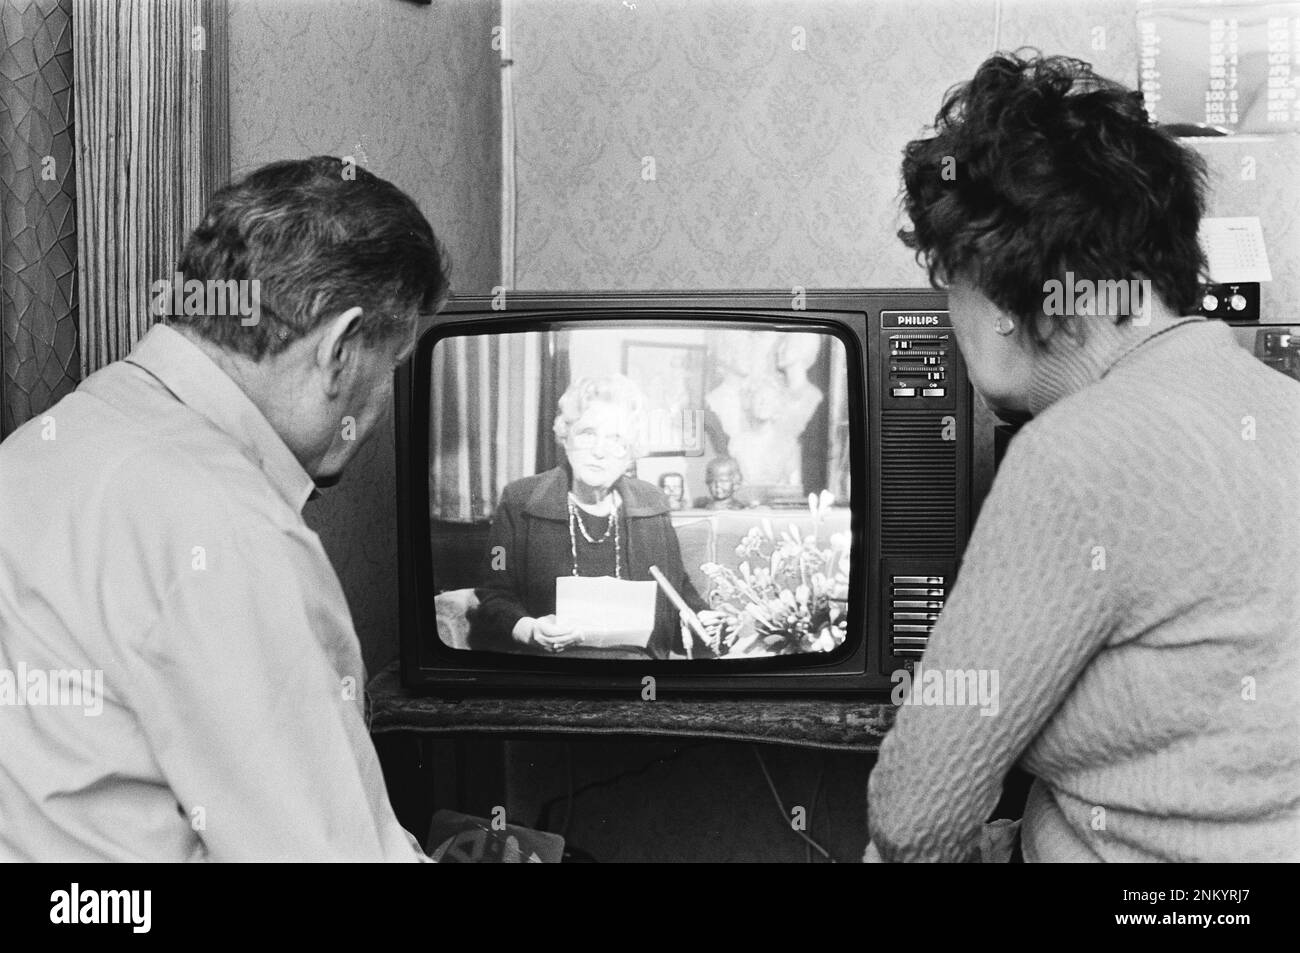 Netherlands History: Netherlands residents watch as Queen Juliana announces her abdication via TV; Prime Minister Dries van Agt during a speech on TV ca. February 1, 1980 Stock Photo